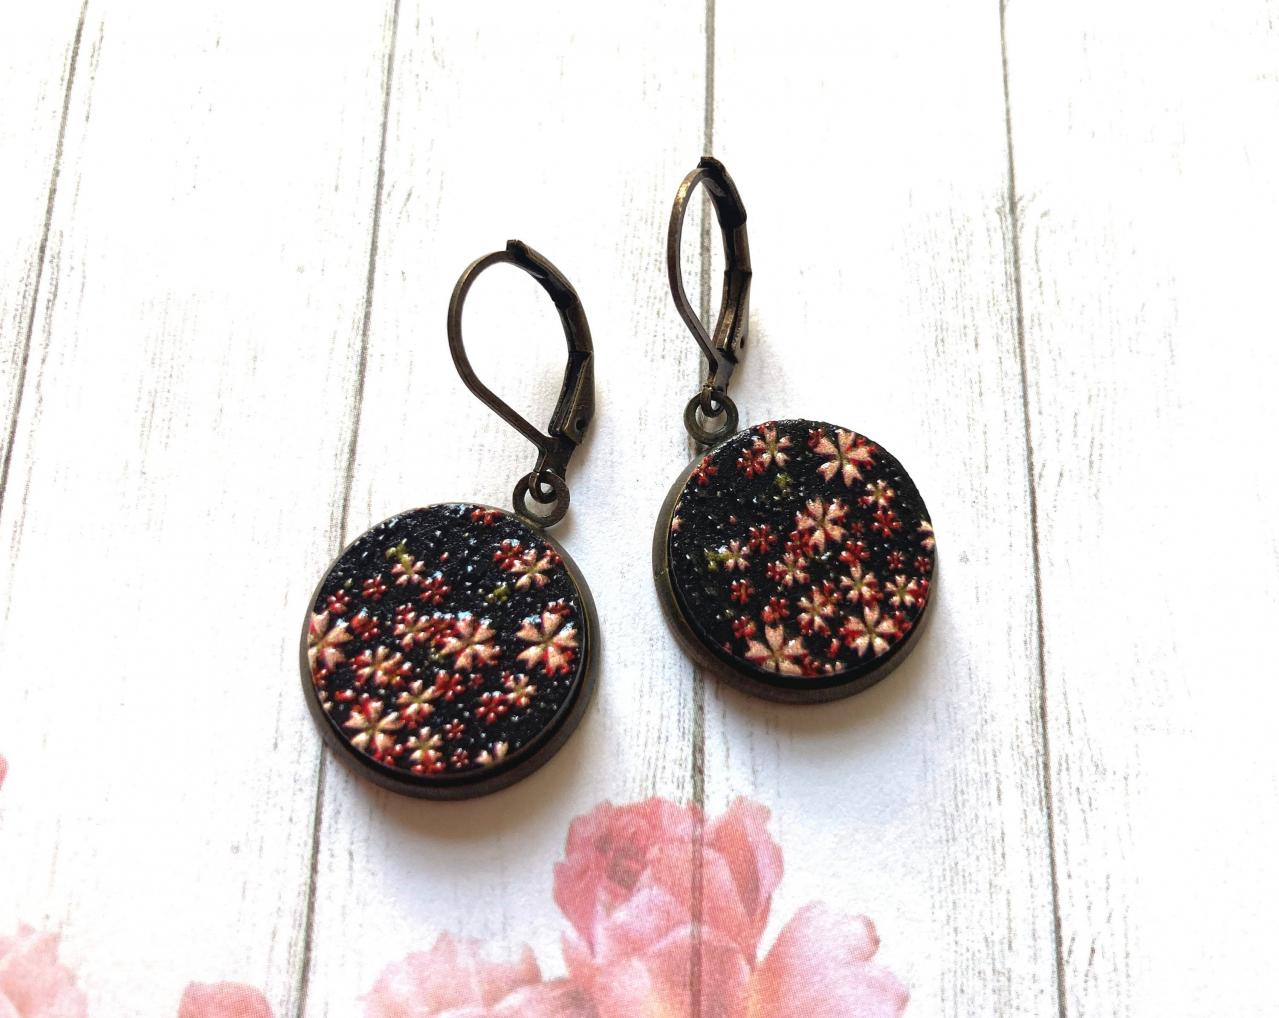 Gorgeous Brass Earrings With Black Flower Pendants, Embossed Wood And Brass, Selma Dreams